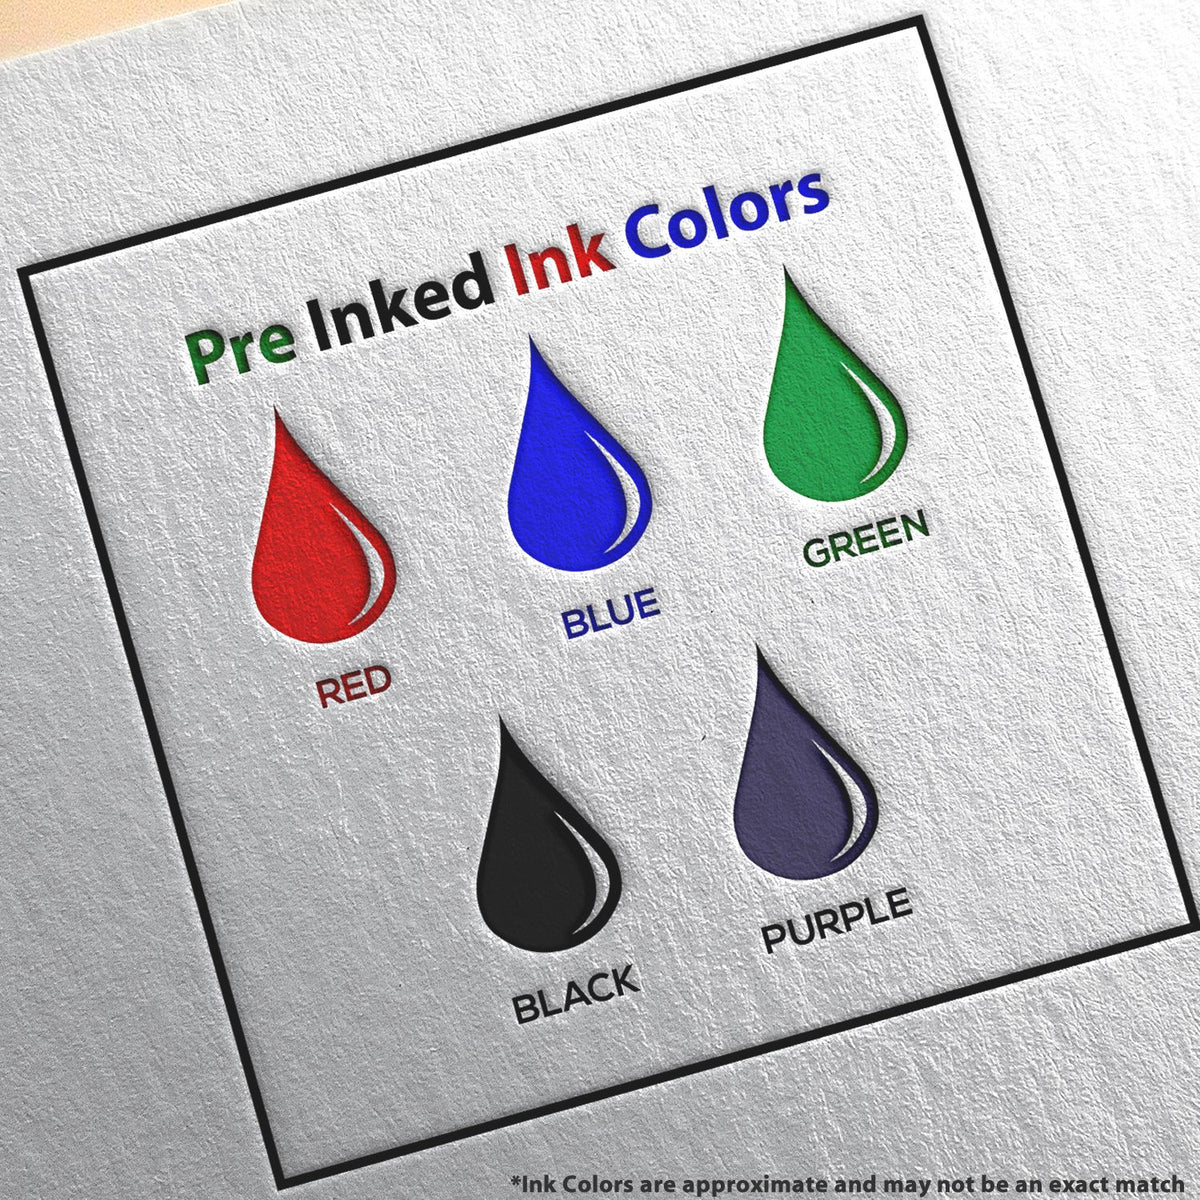 A picture showing the different ink colors or hues available for the Premium MaxLight Pre-Inked Texas Geology Stamp